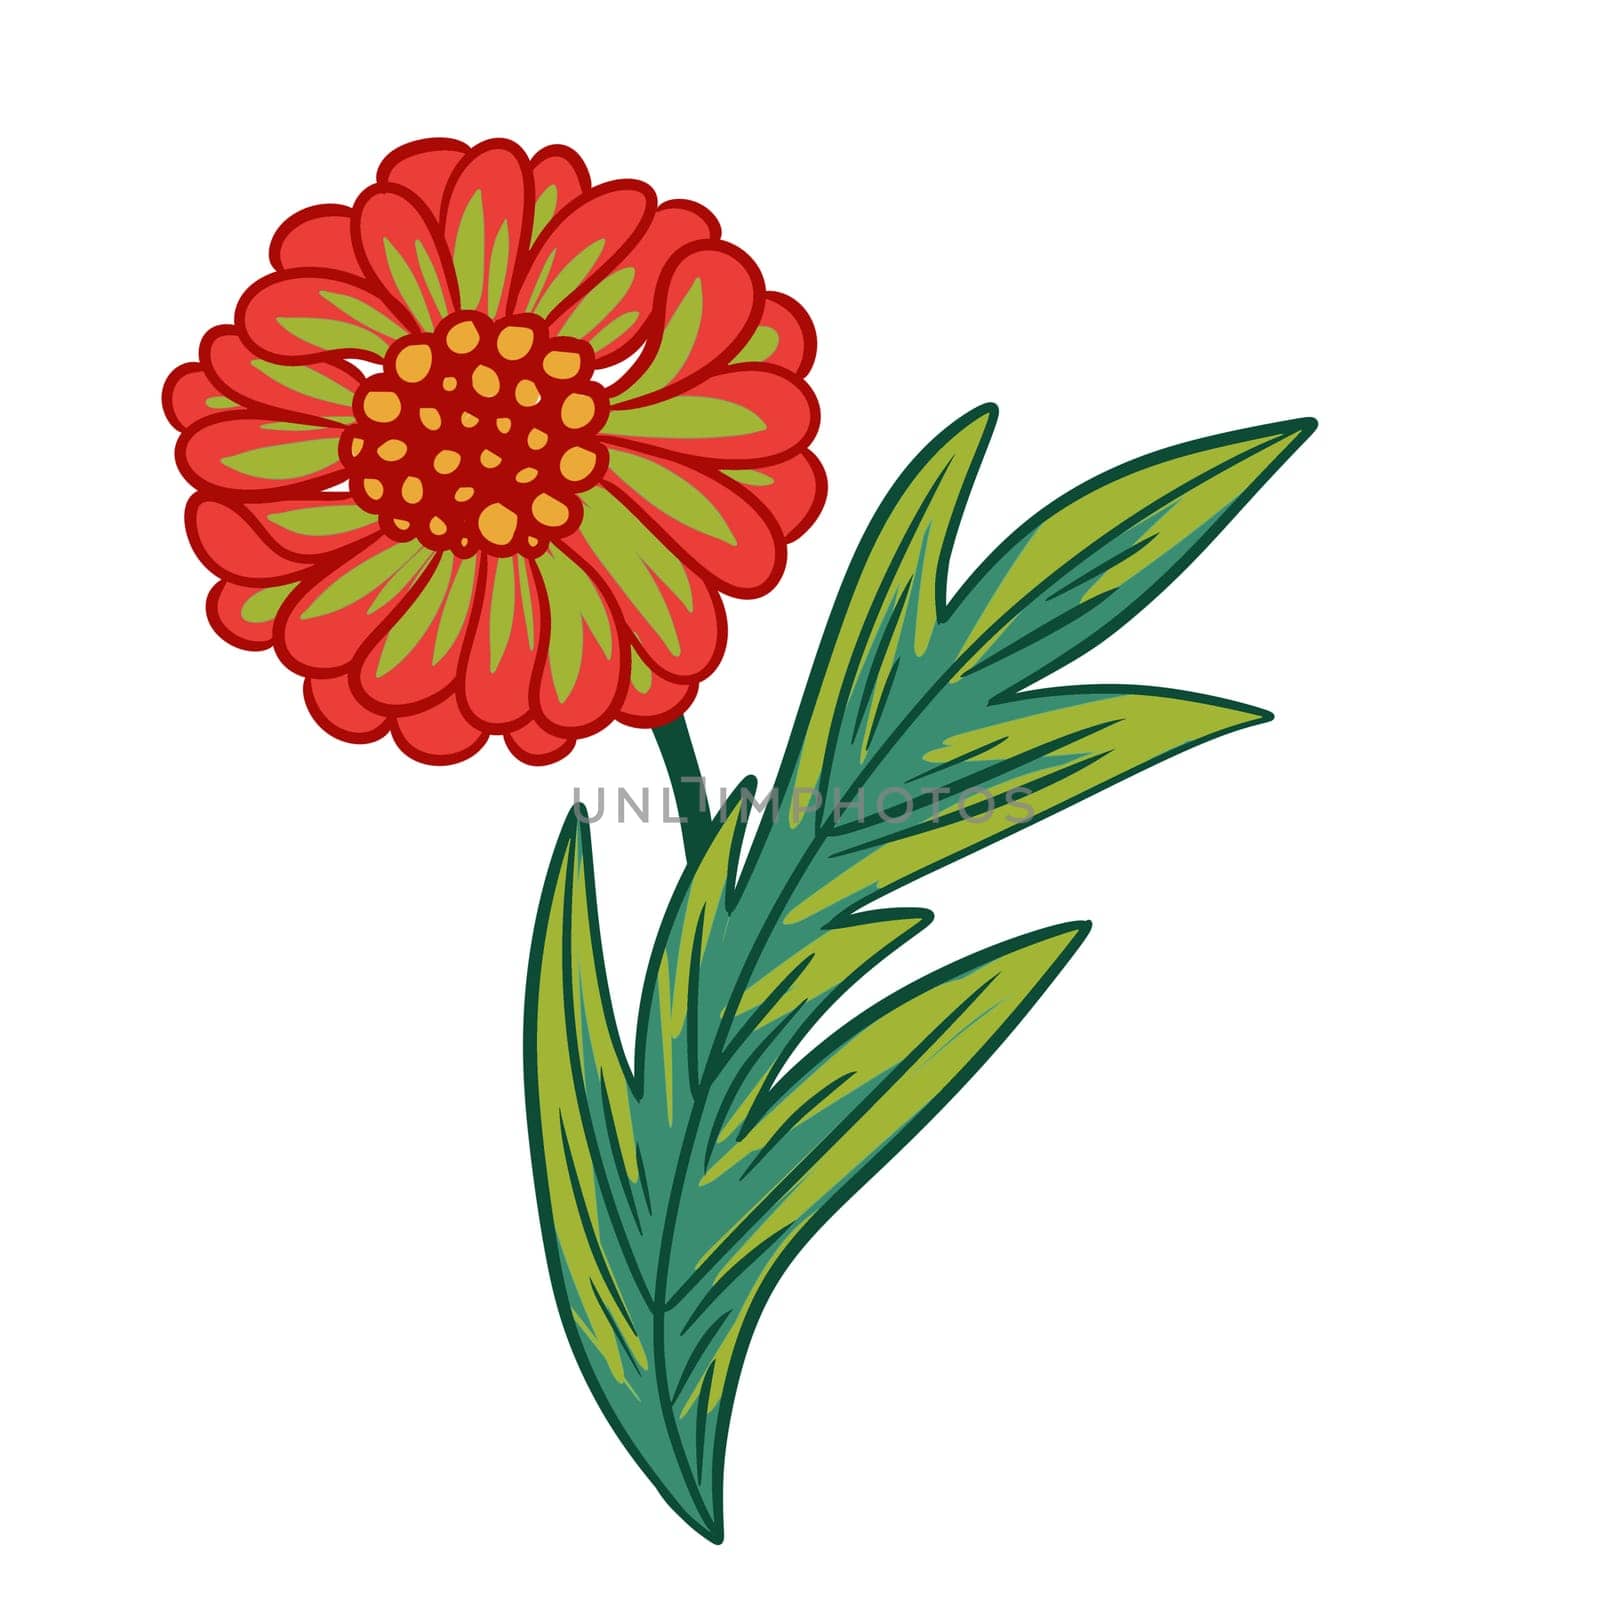 Hand drawn illustration of orange green zinnia daisy daisy flowers leaves on white isolated background. Bright colorful retro vintage print design, 60s 70s floral art, nature plant bloom blossom.